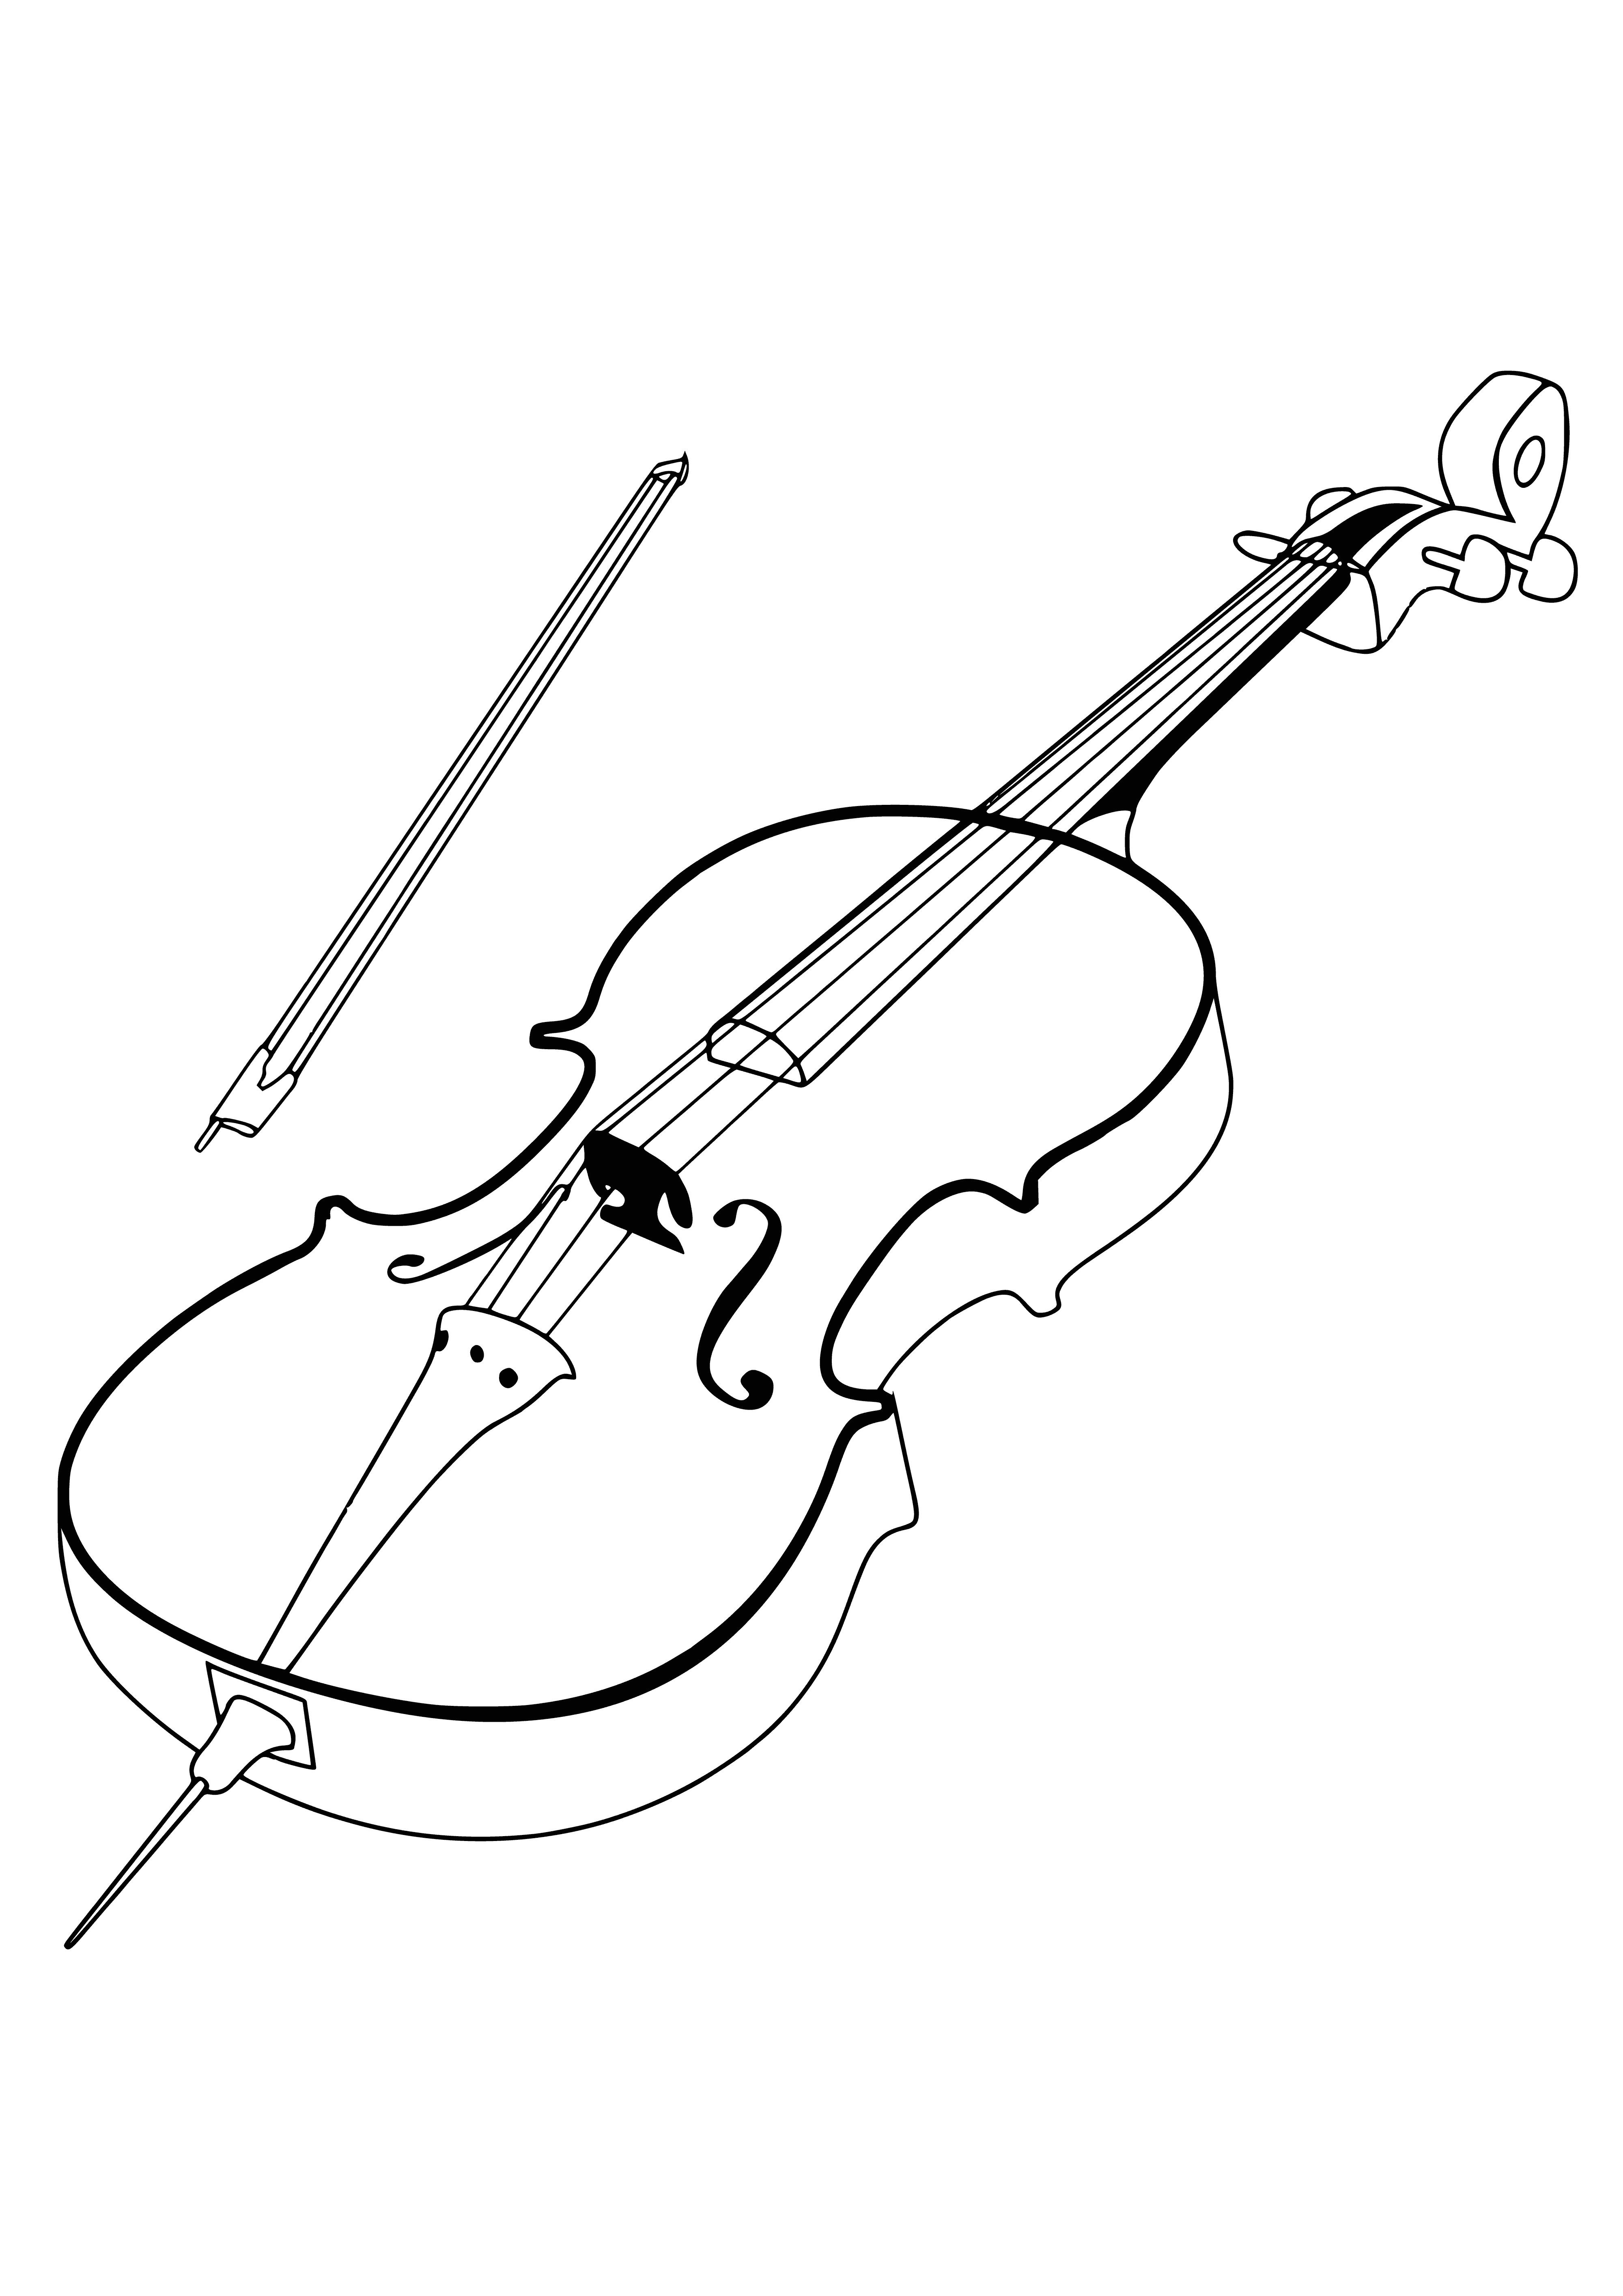 coloring page: Person playing the cello with a bow in their right hand, wearing black clothes, hair pulled back. Cello is a large, wooden instrument with four strings stretched across the neck and body. #musicalinstrument #cello #music